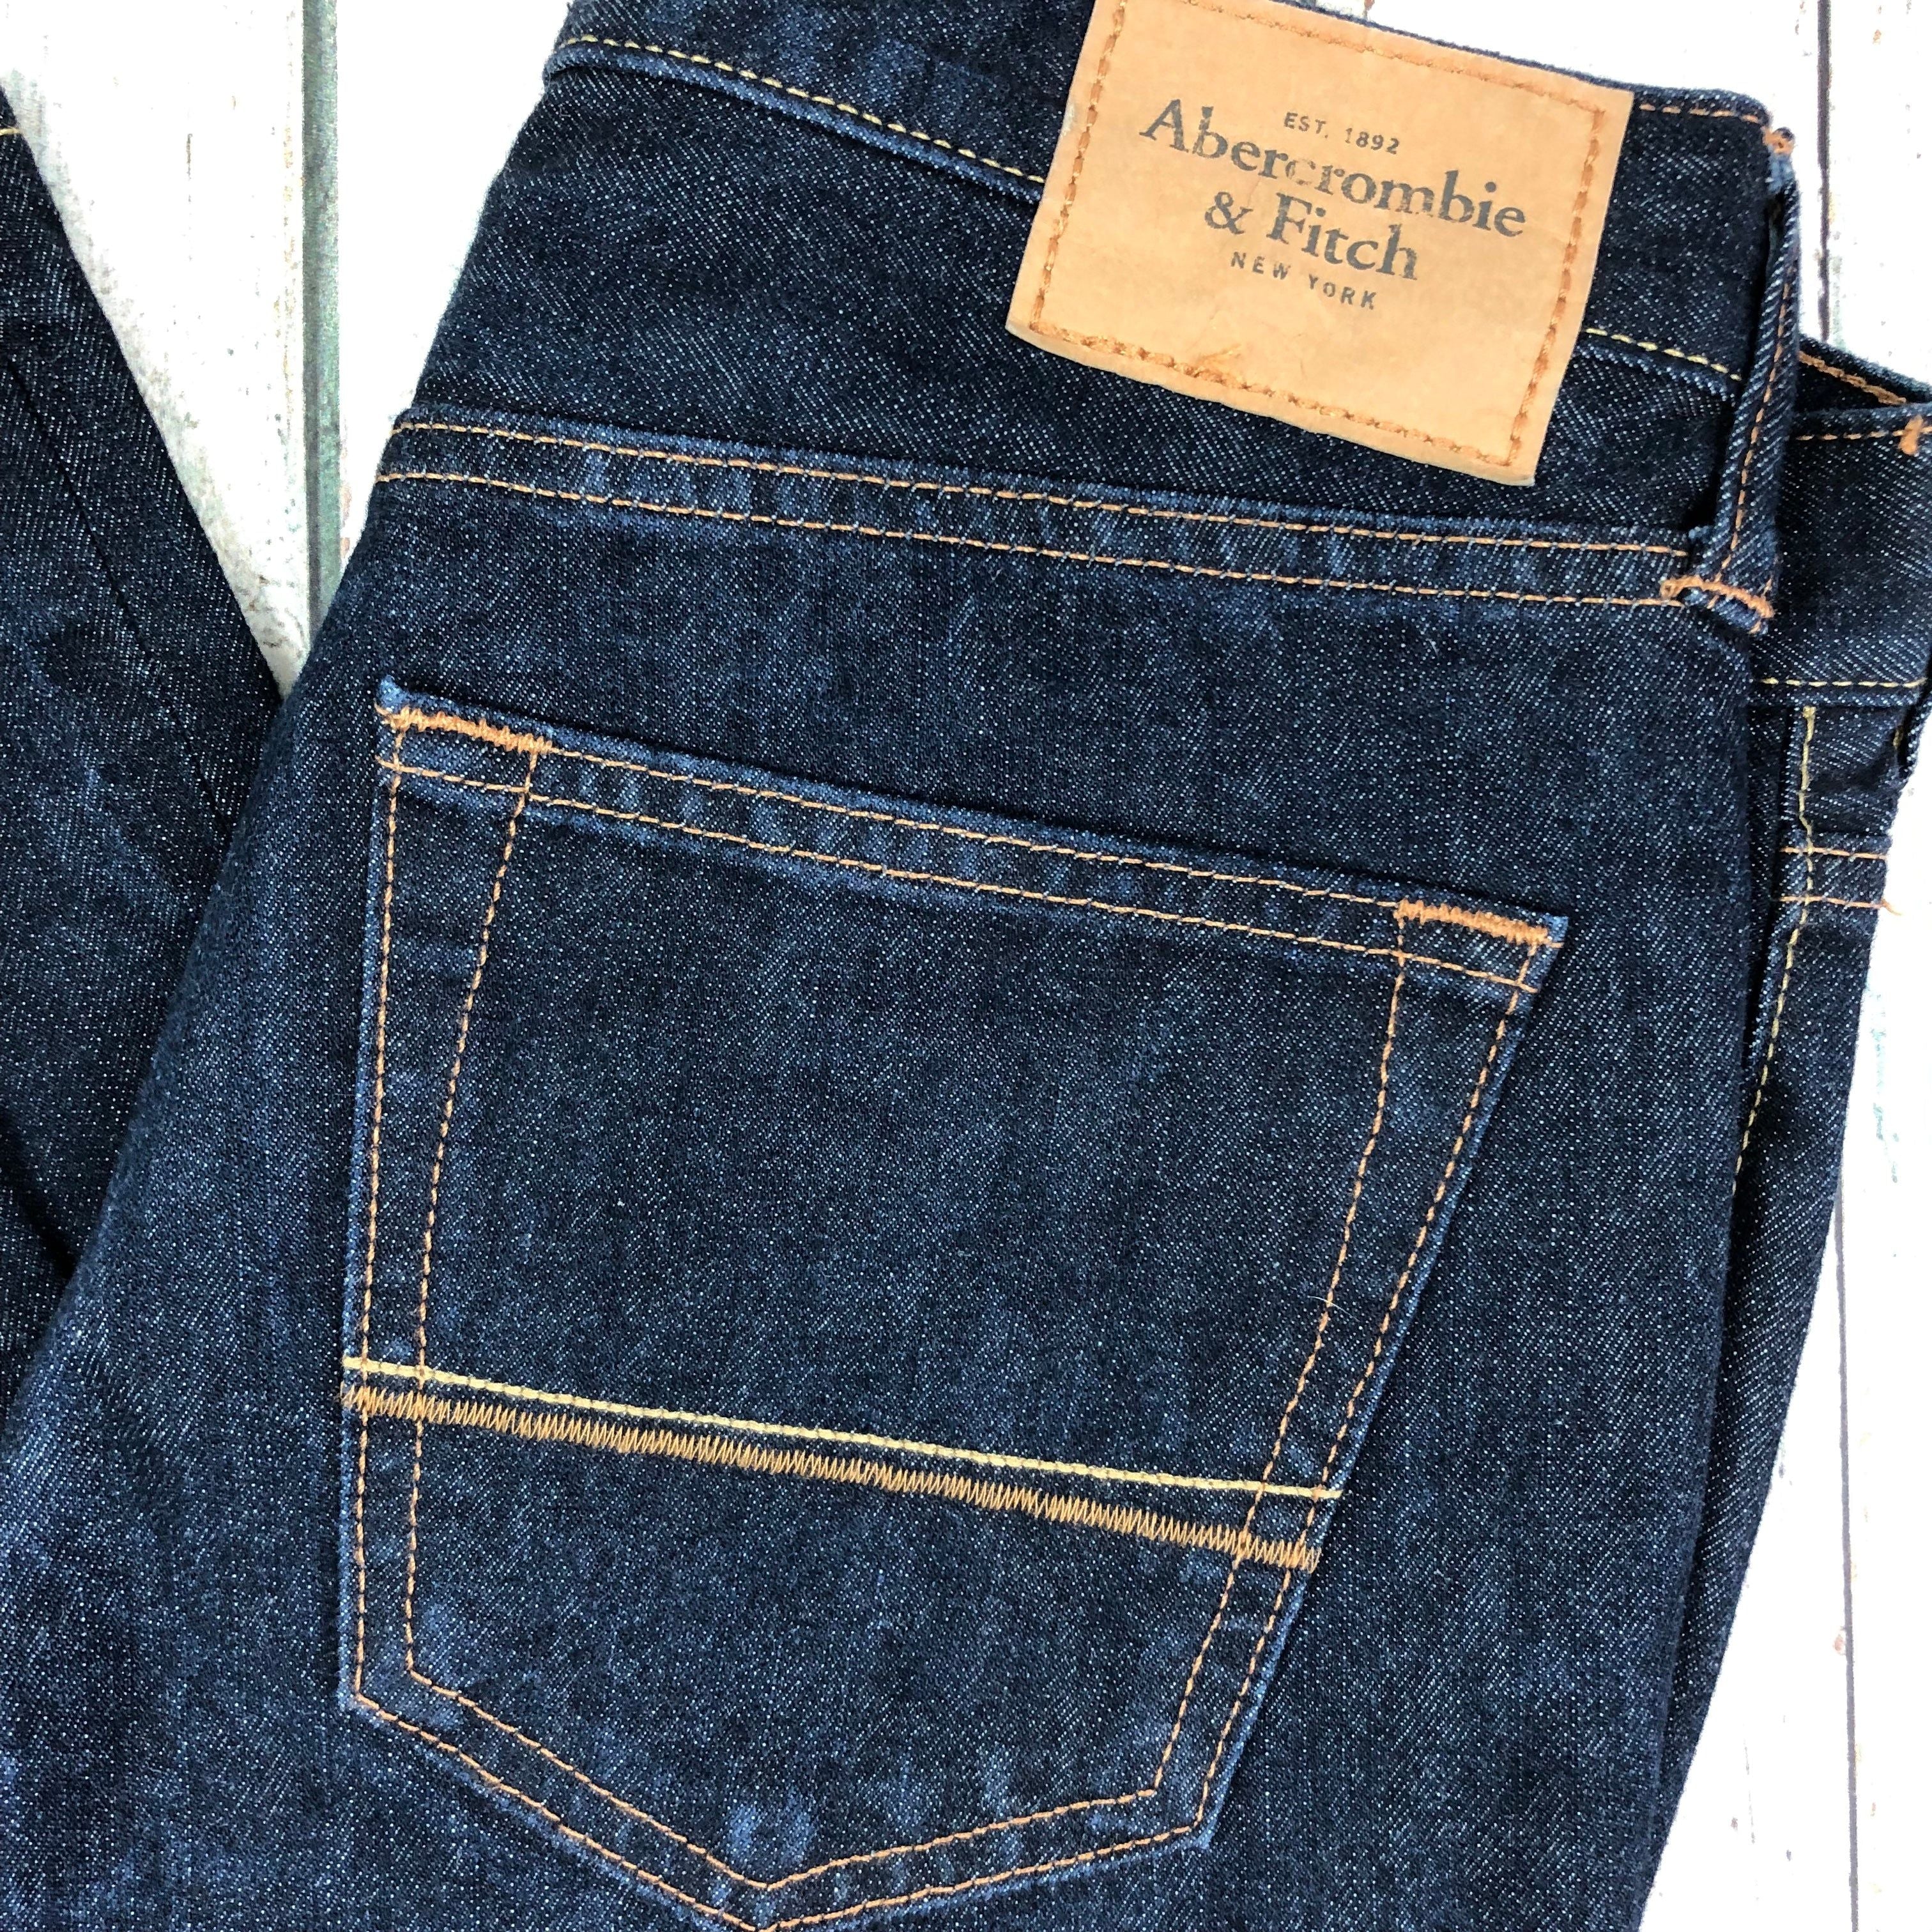 Abercrombie & Fitch 'The A&F Skinny' Jeans - Size 29/30 | eBay